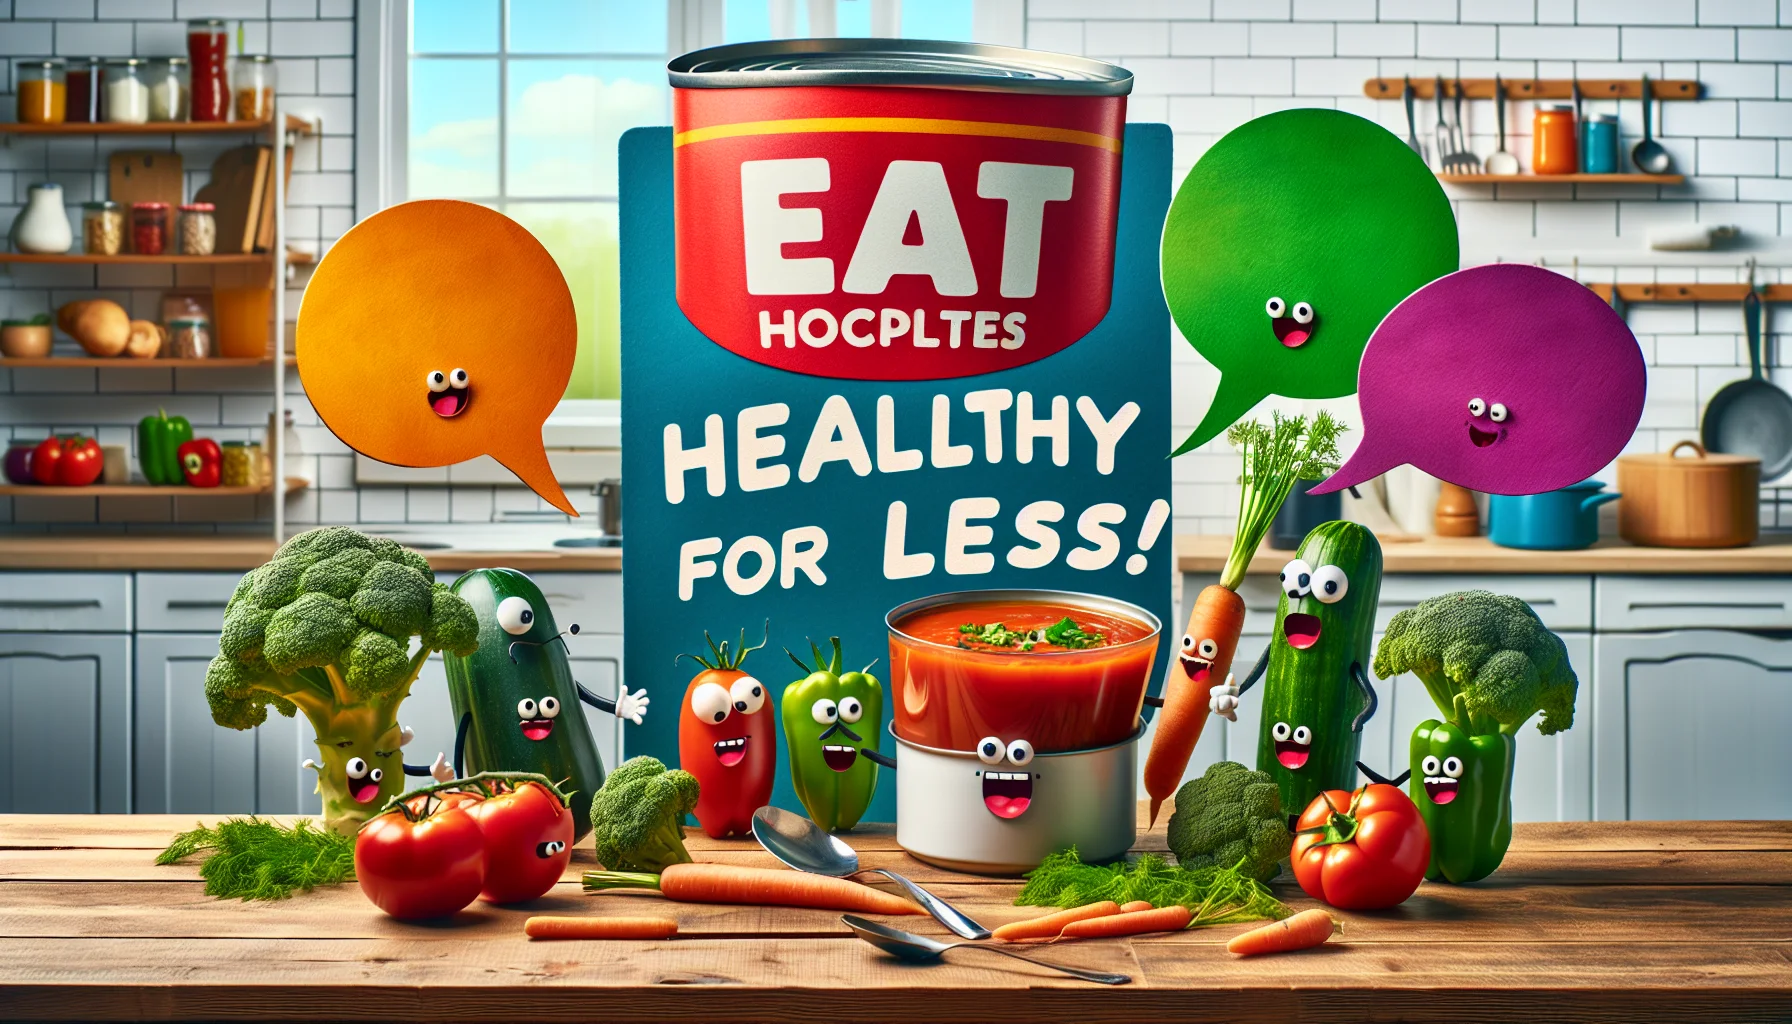 A humorous, budget-friendly, healthy eating scenario unfolds in a bright kitchen. A larger than life can of tomato soup is in the center of a wooden table, surrounded by a collection of raw vegetables like carrots, broccoli, and bell peppers. The vegetables, drawn with anthropomorphic features, seem to approach the soup with zeal, wearing comical expressions of hunger and excitement. Vibrant colored speech bubbles floating above them display simple, yet delicious recipes using tomato soup, like 'Creamy Tomato Vegetable Stew' or 'Tomato Soup Pasta'. The words, 'Eat Healthy for Less!' are displayed in bold letters above the entire scene.